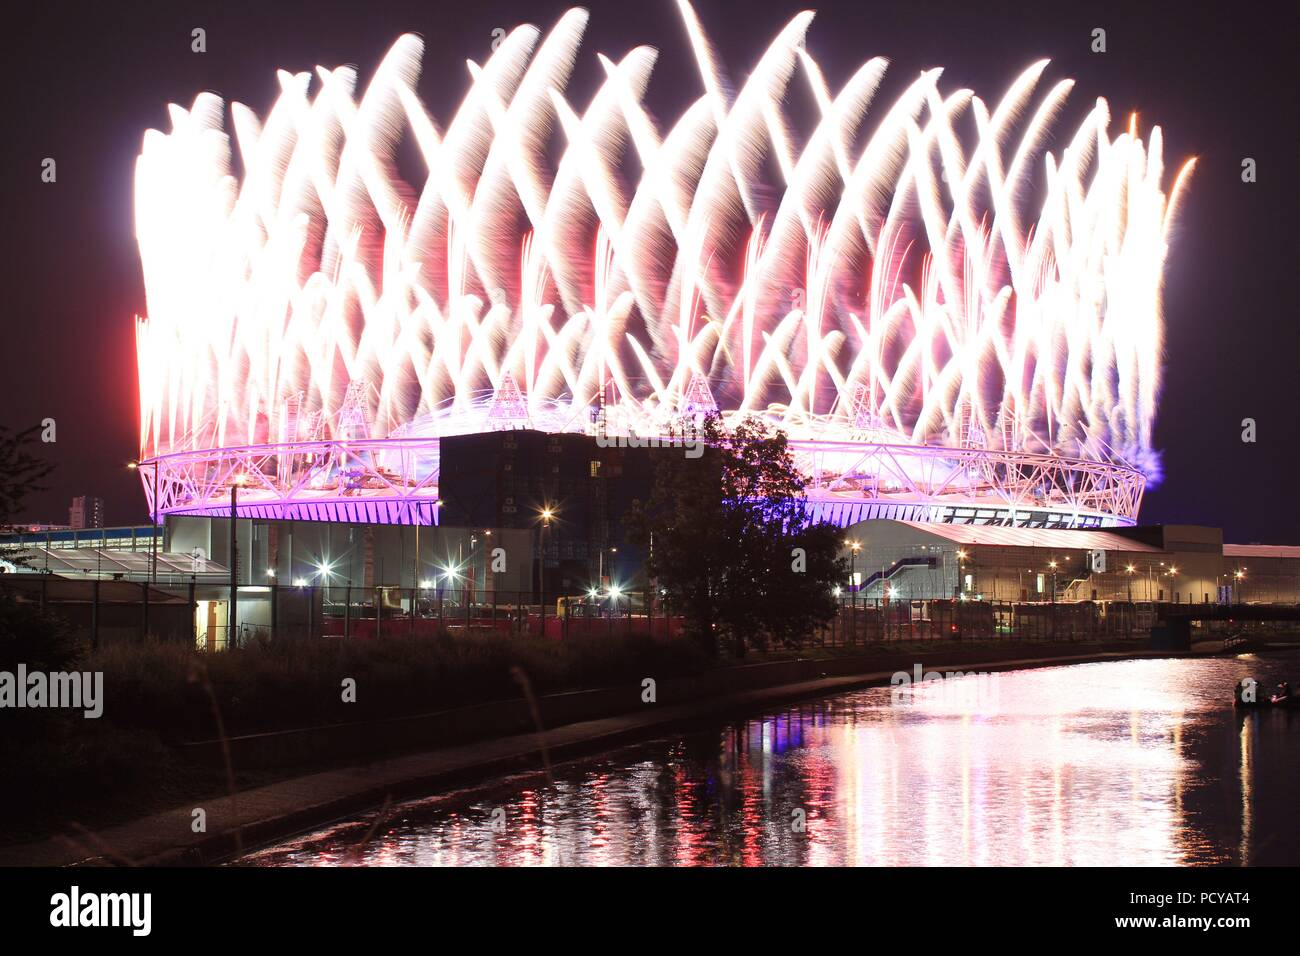 The firework display over the Olympic Stadium during the Closing Ceremony of the London 2012 Olympic Games, London, Great Britain Stock Photo